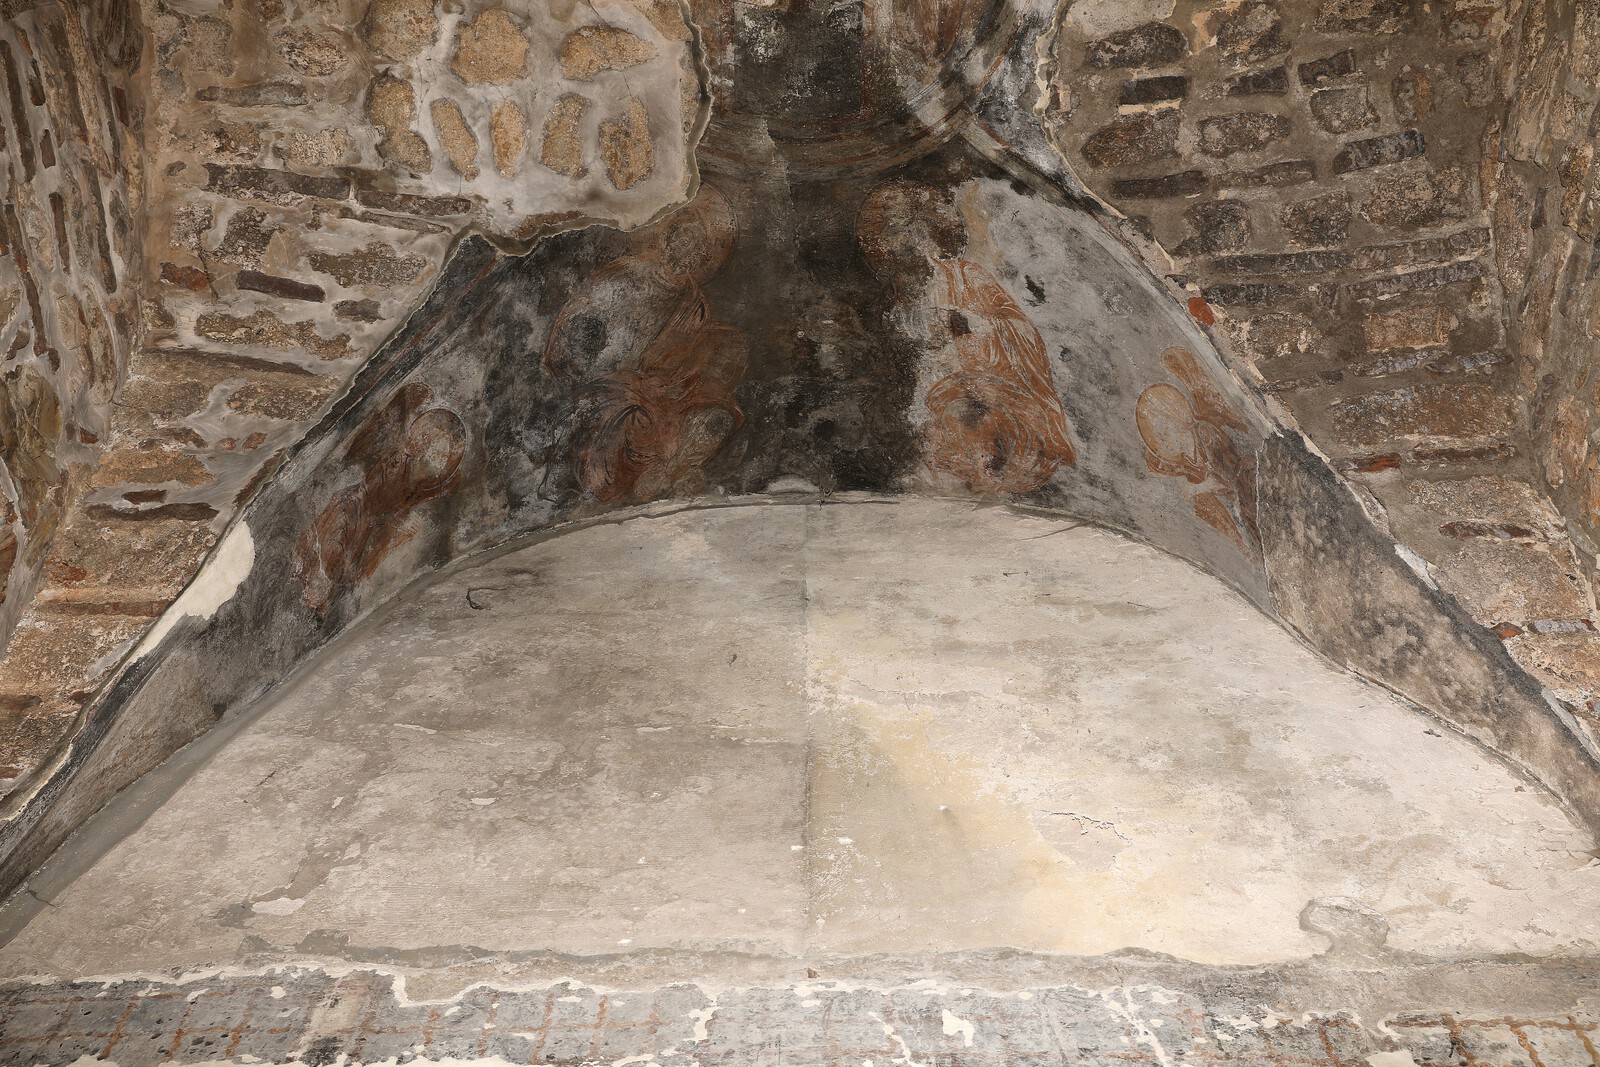 Narthex, vault and the uppermost section of the east wall